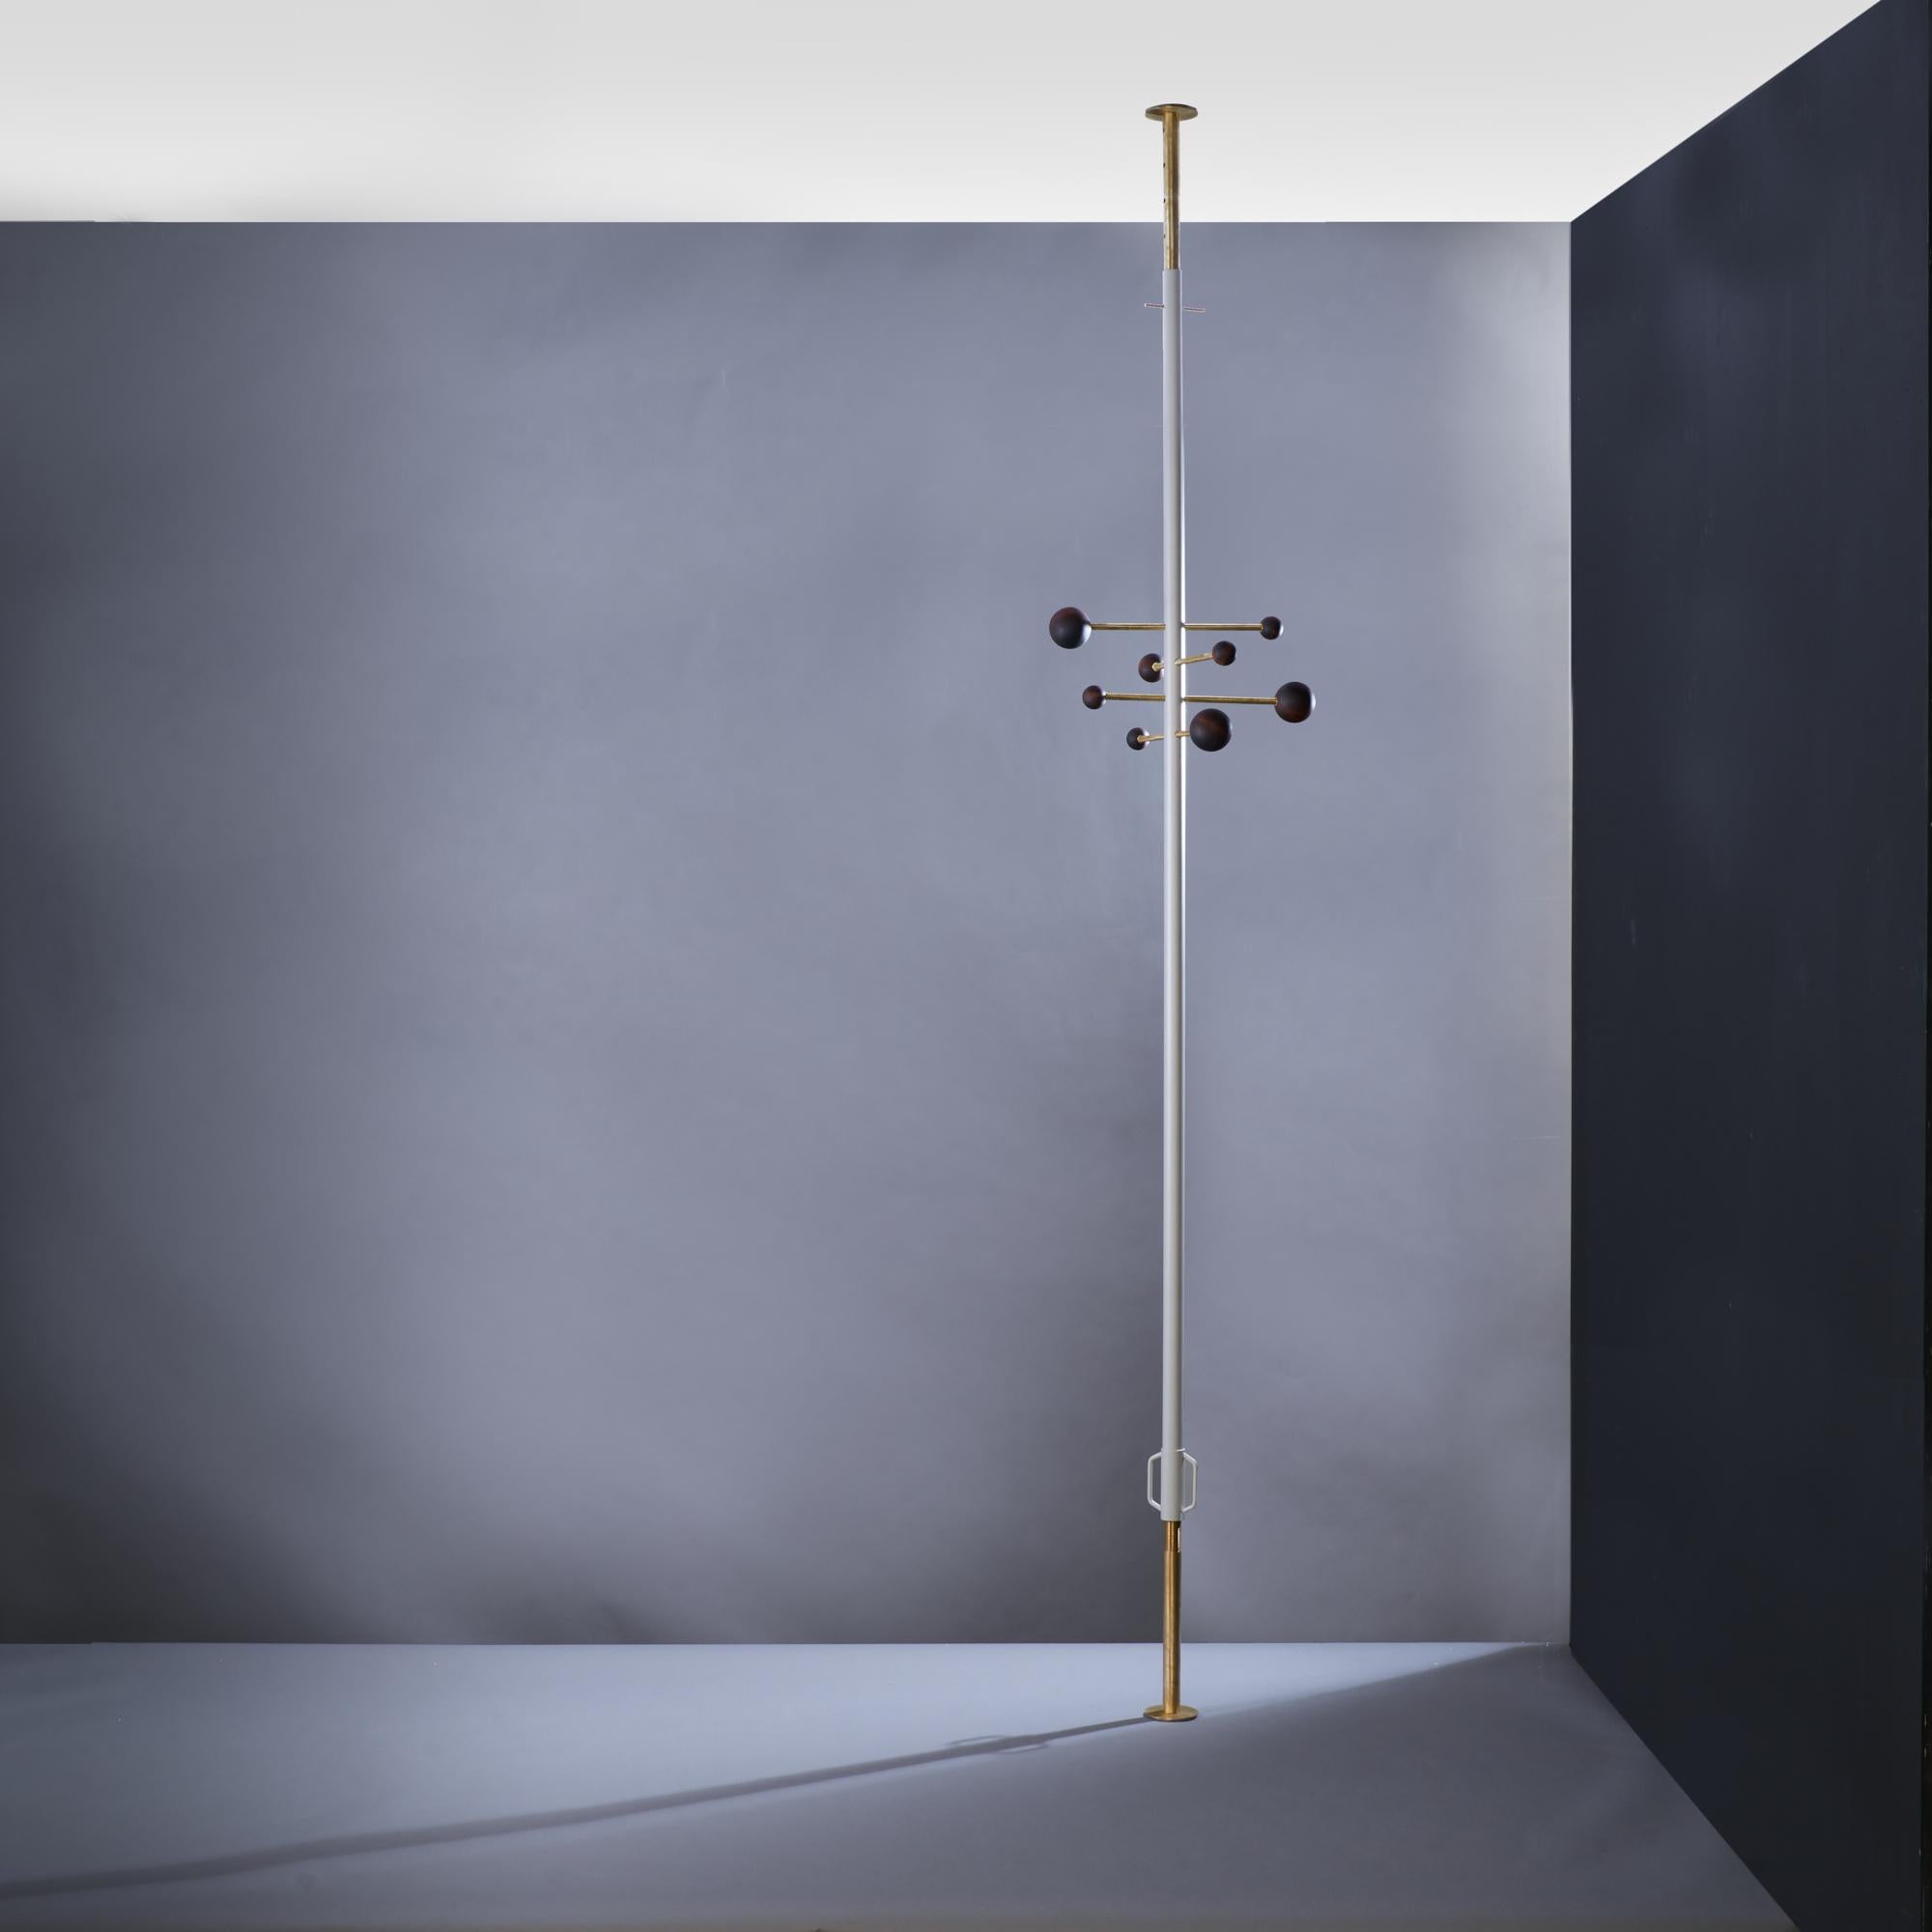 Modern sky-earth coat hanger 'PUNTELLO'
Prop hanger is part of our signed and numbered sky-earth collection
The pole is in dark gray painted iron (RAL 7016), the terminals are in brass.
The spheres for the support of the clothes are in stained beech